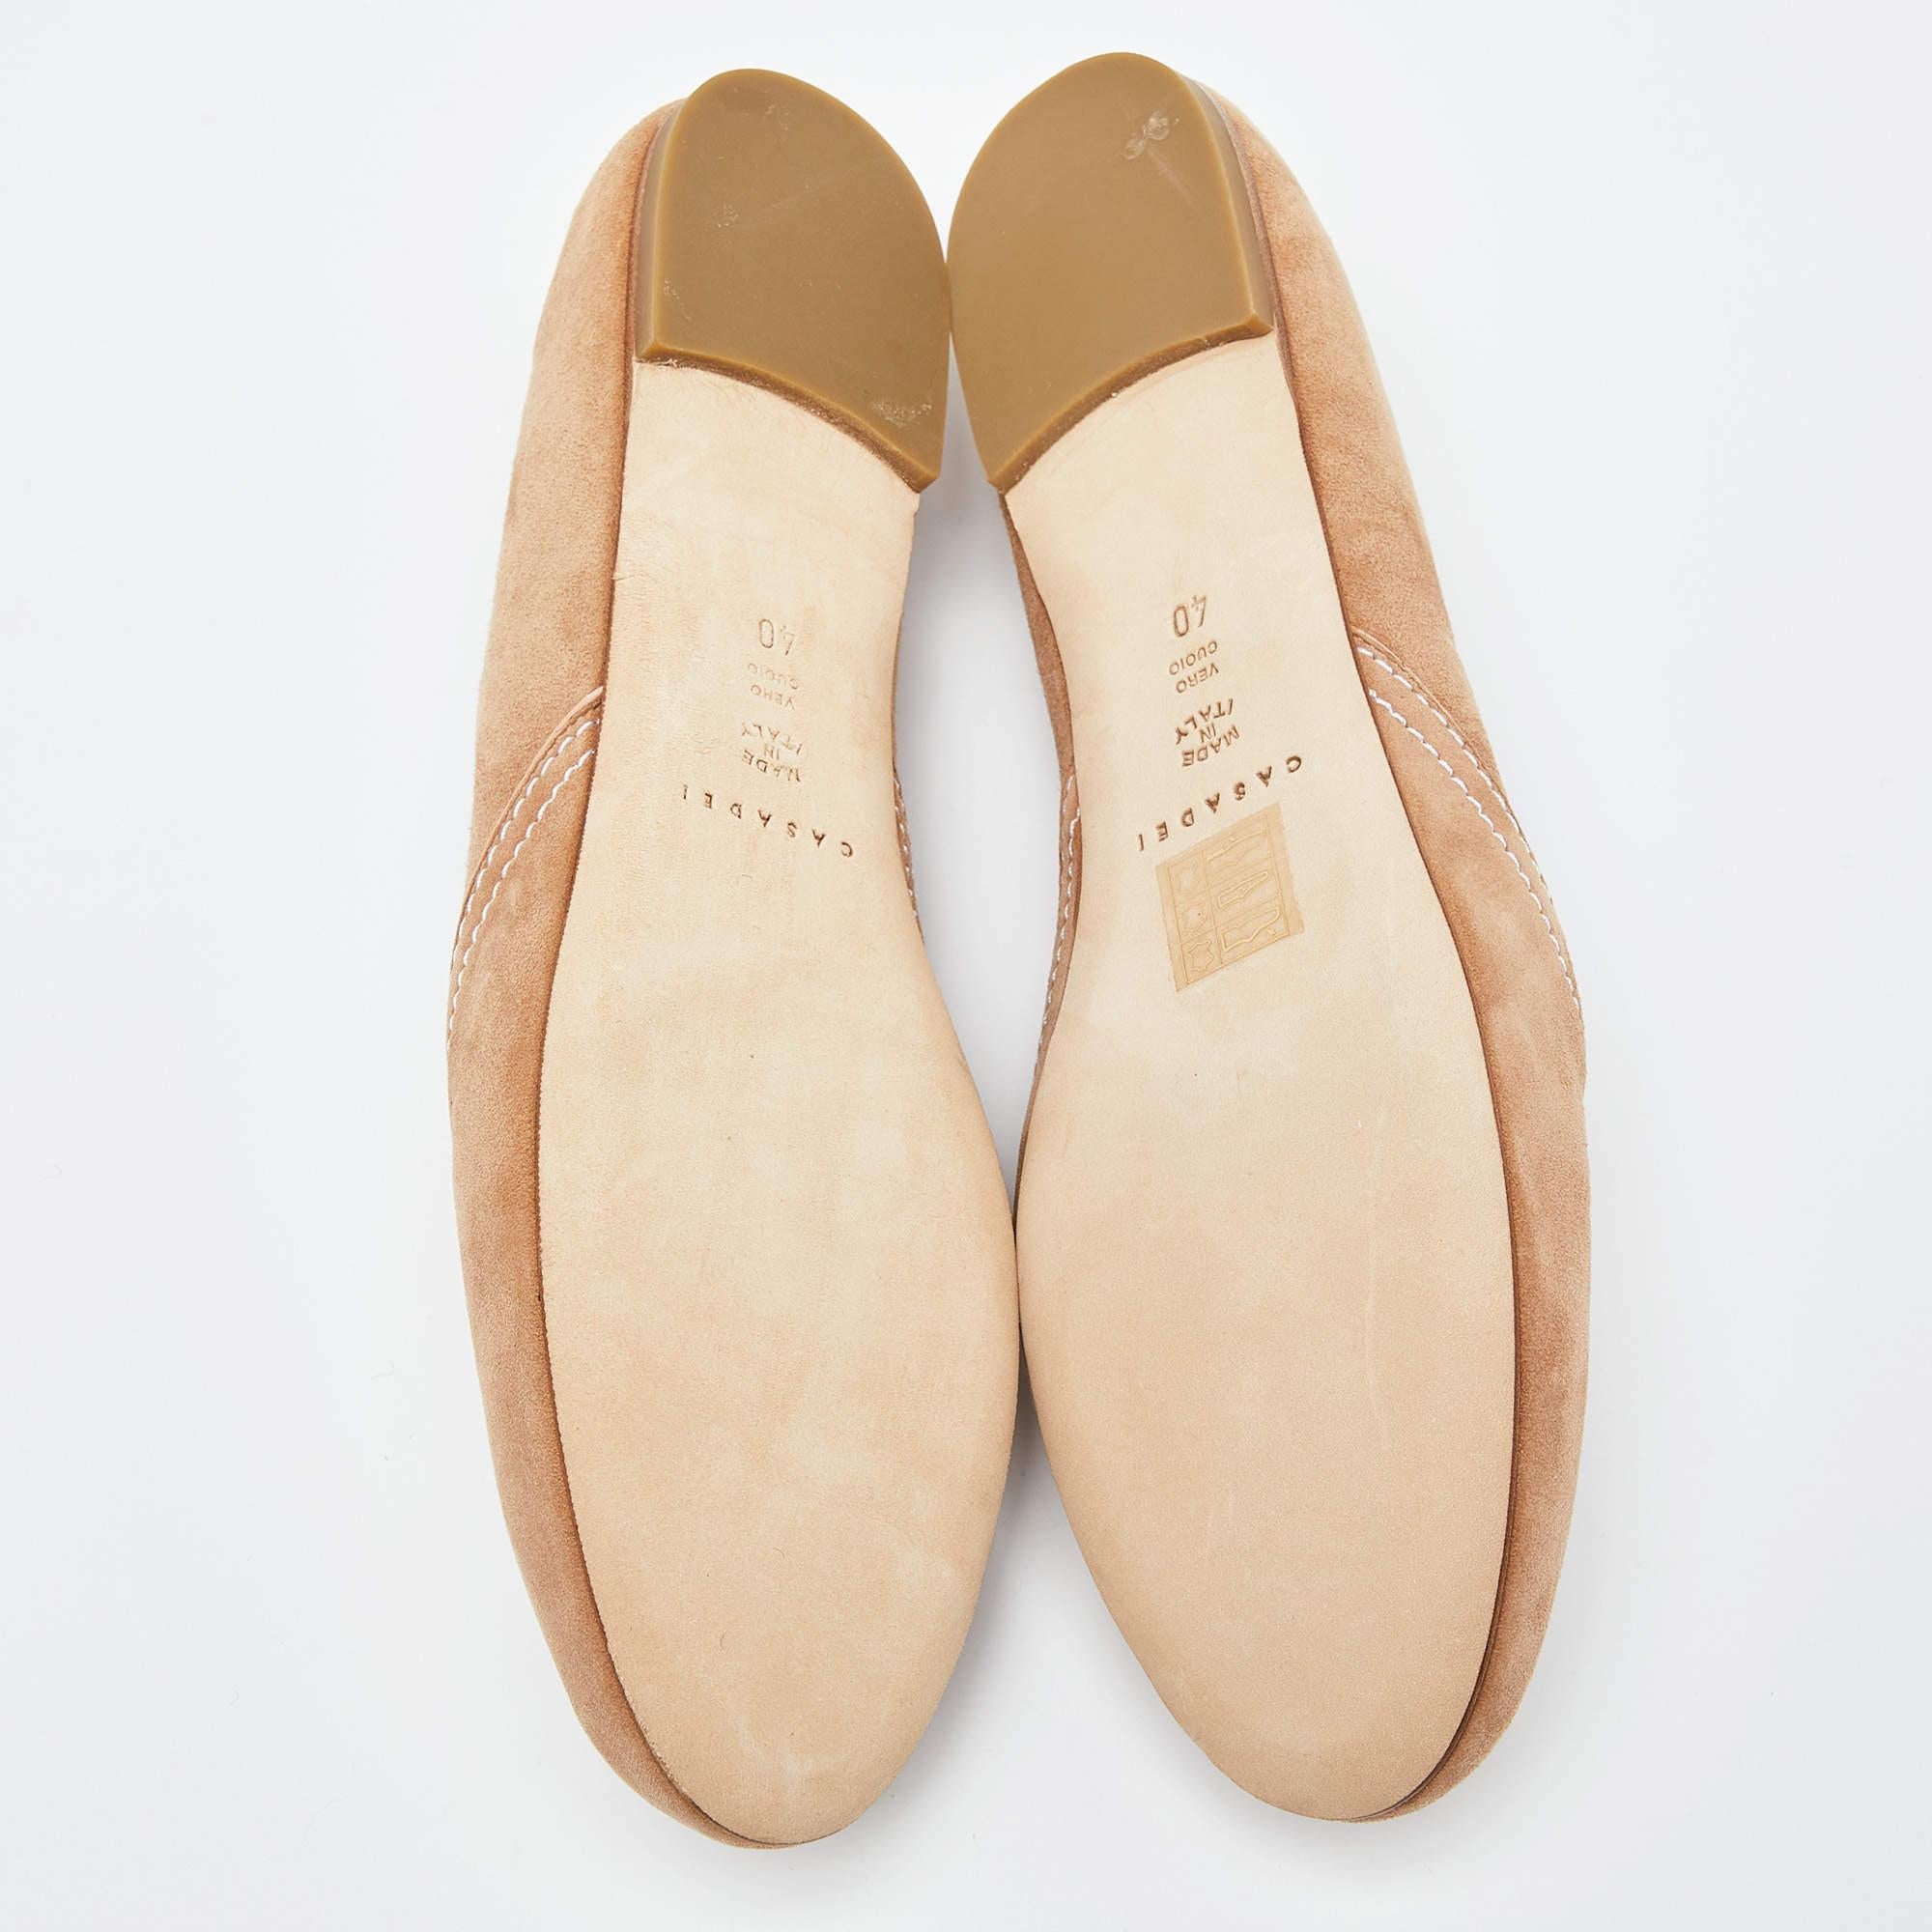 Casadei Beige Suede Smoking Slippers Size 40 For Sale 4